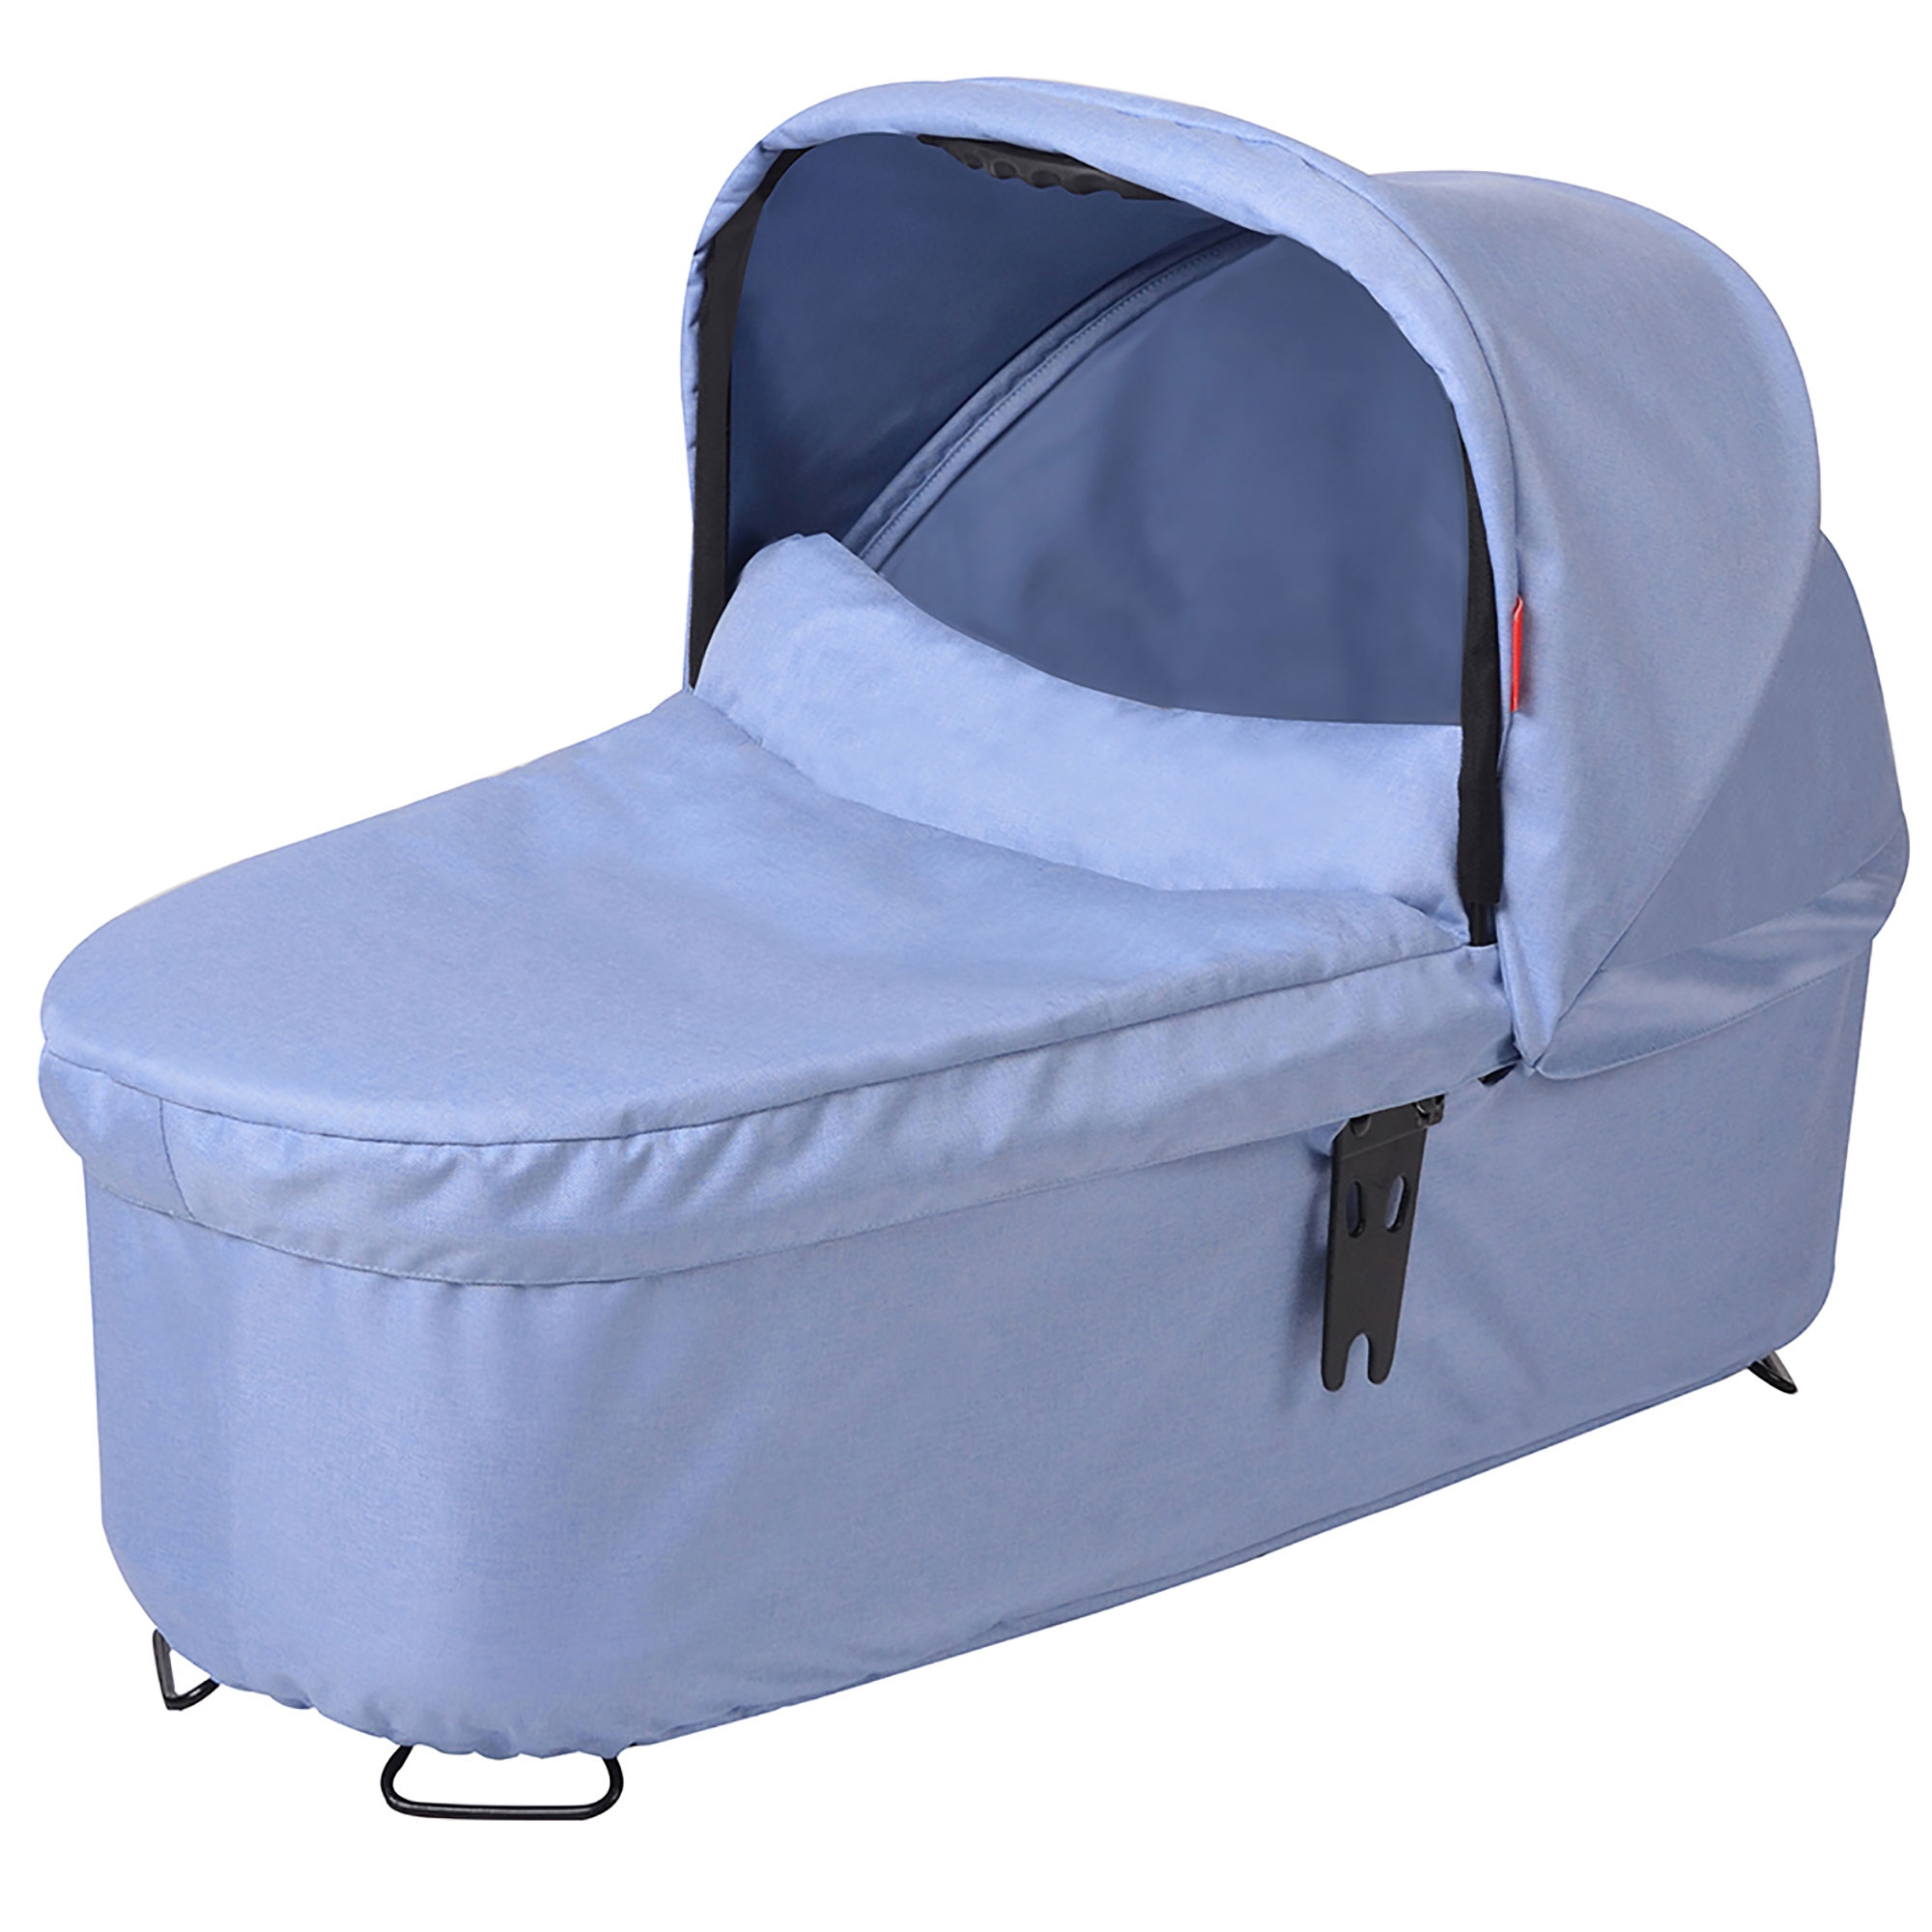 phil and teds snug carrycot